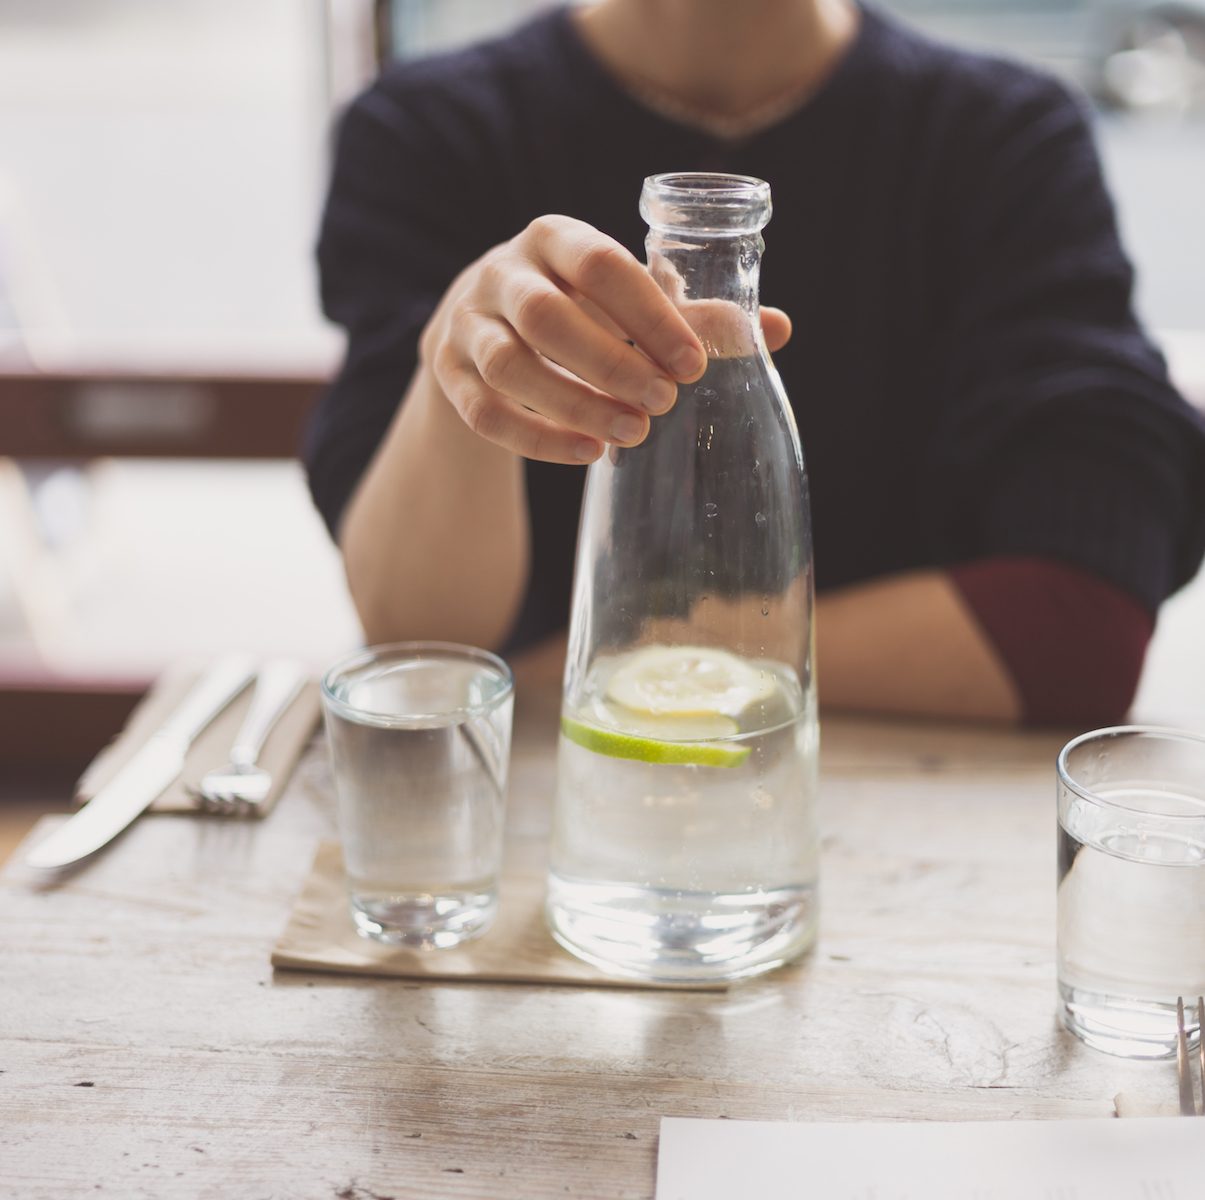 A young woman is sitting at a table in a restaurant and is drinking water